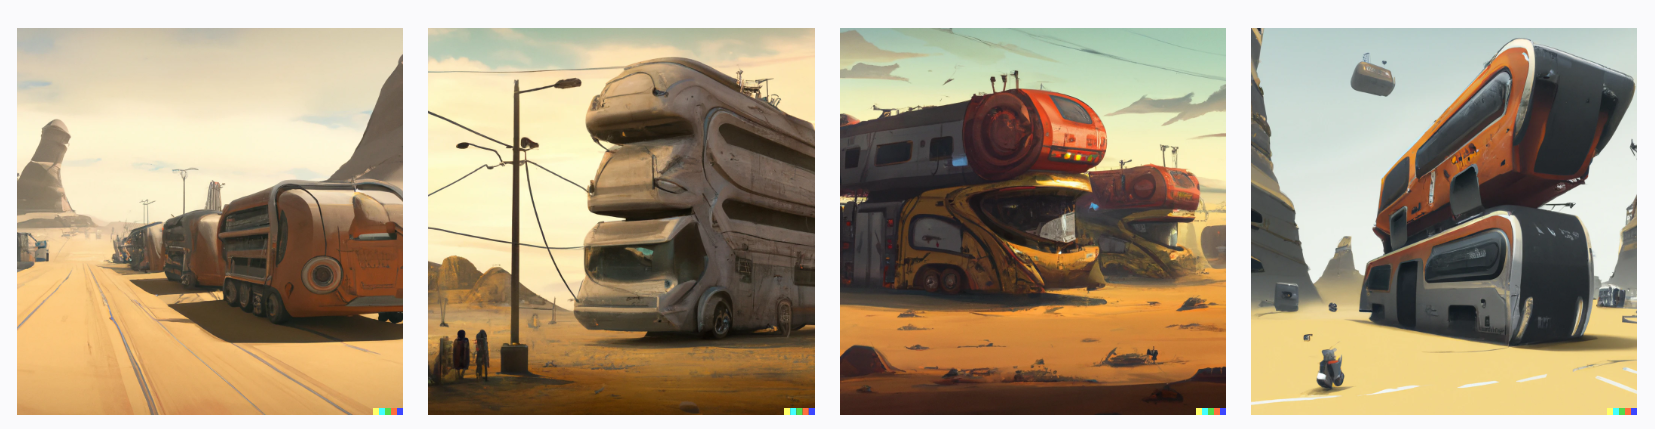 giant city on wheels travelling through a desert forming a bus, digital art